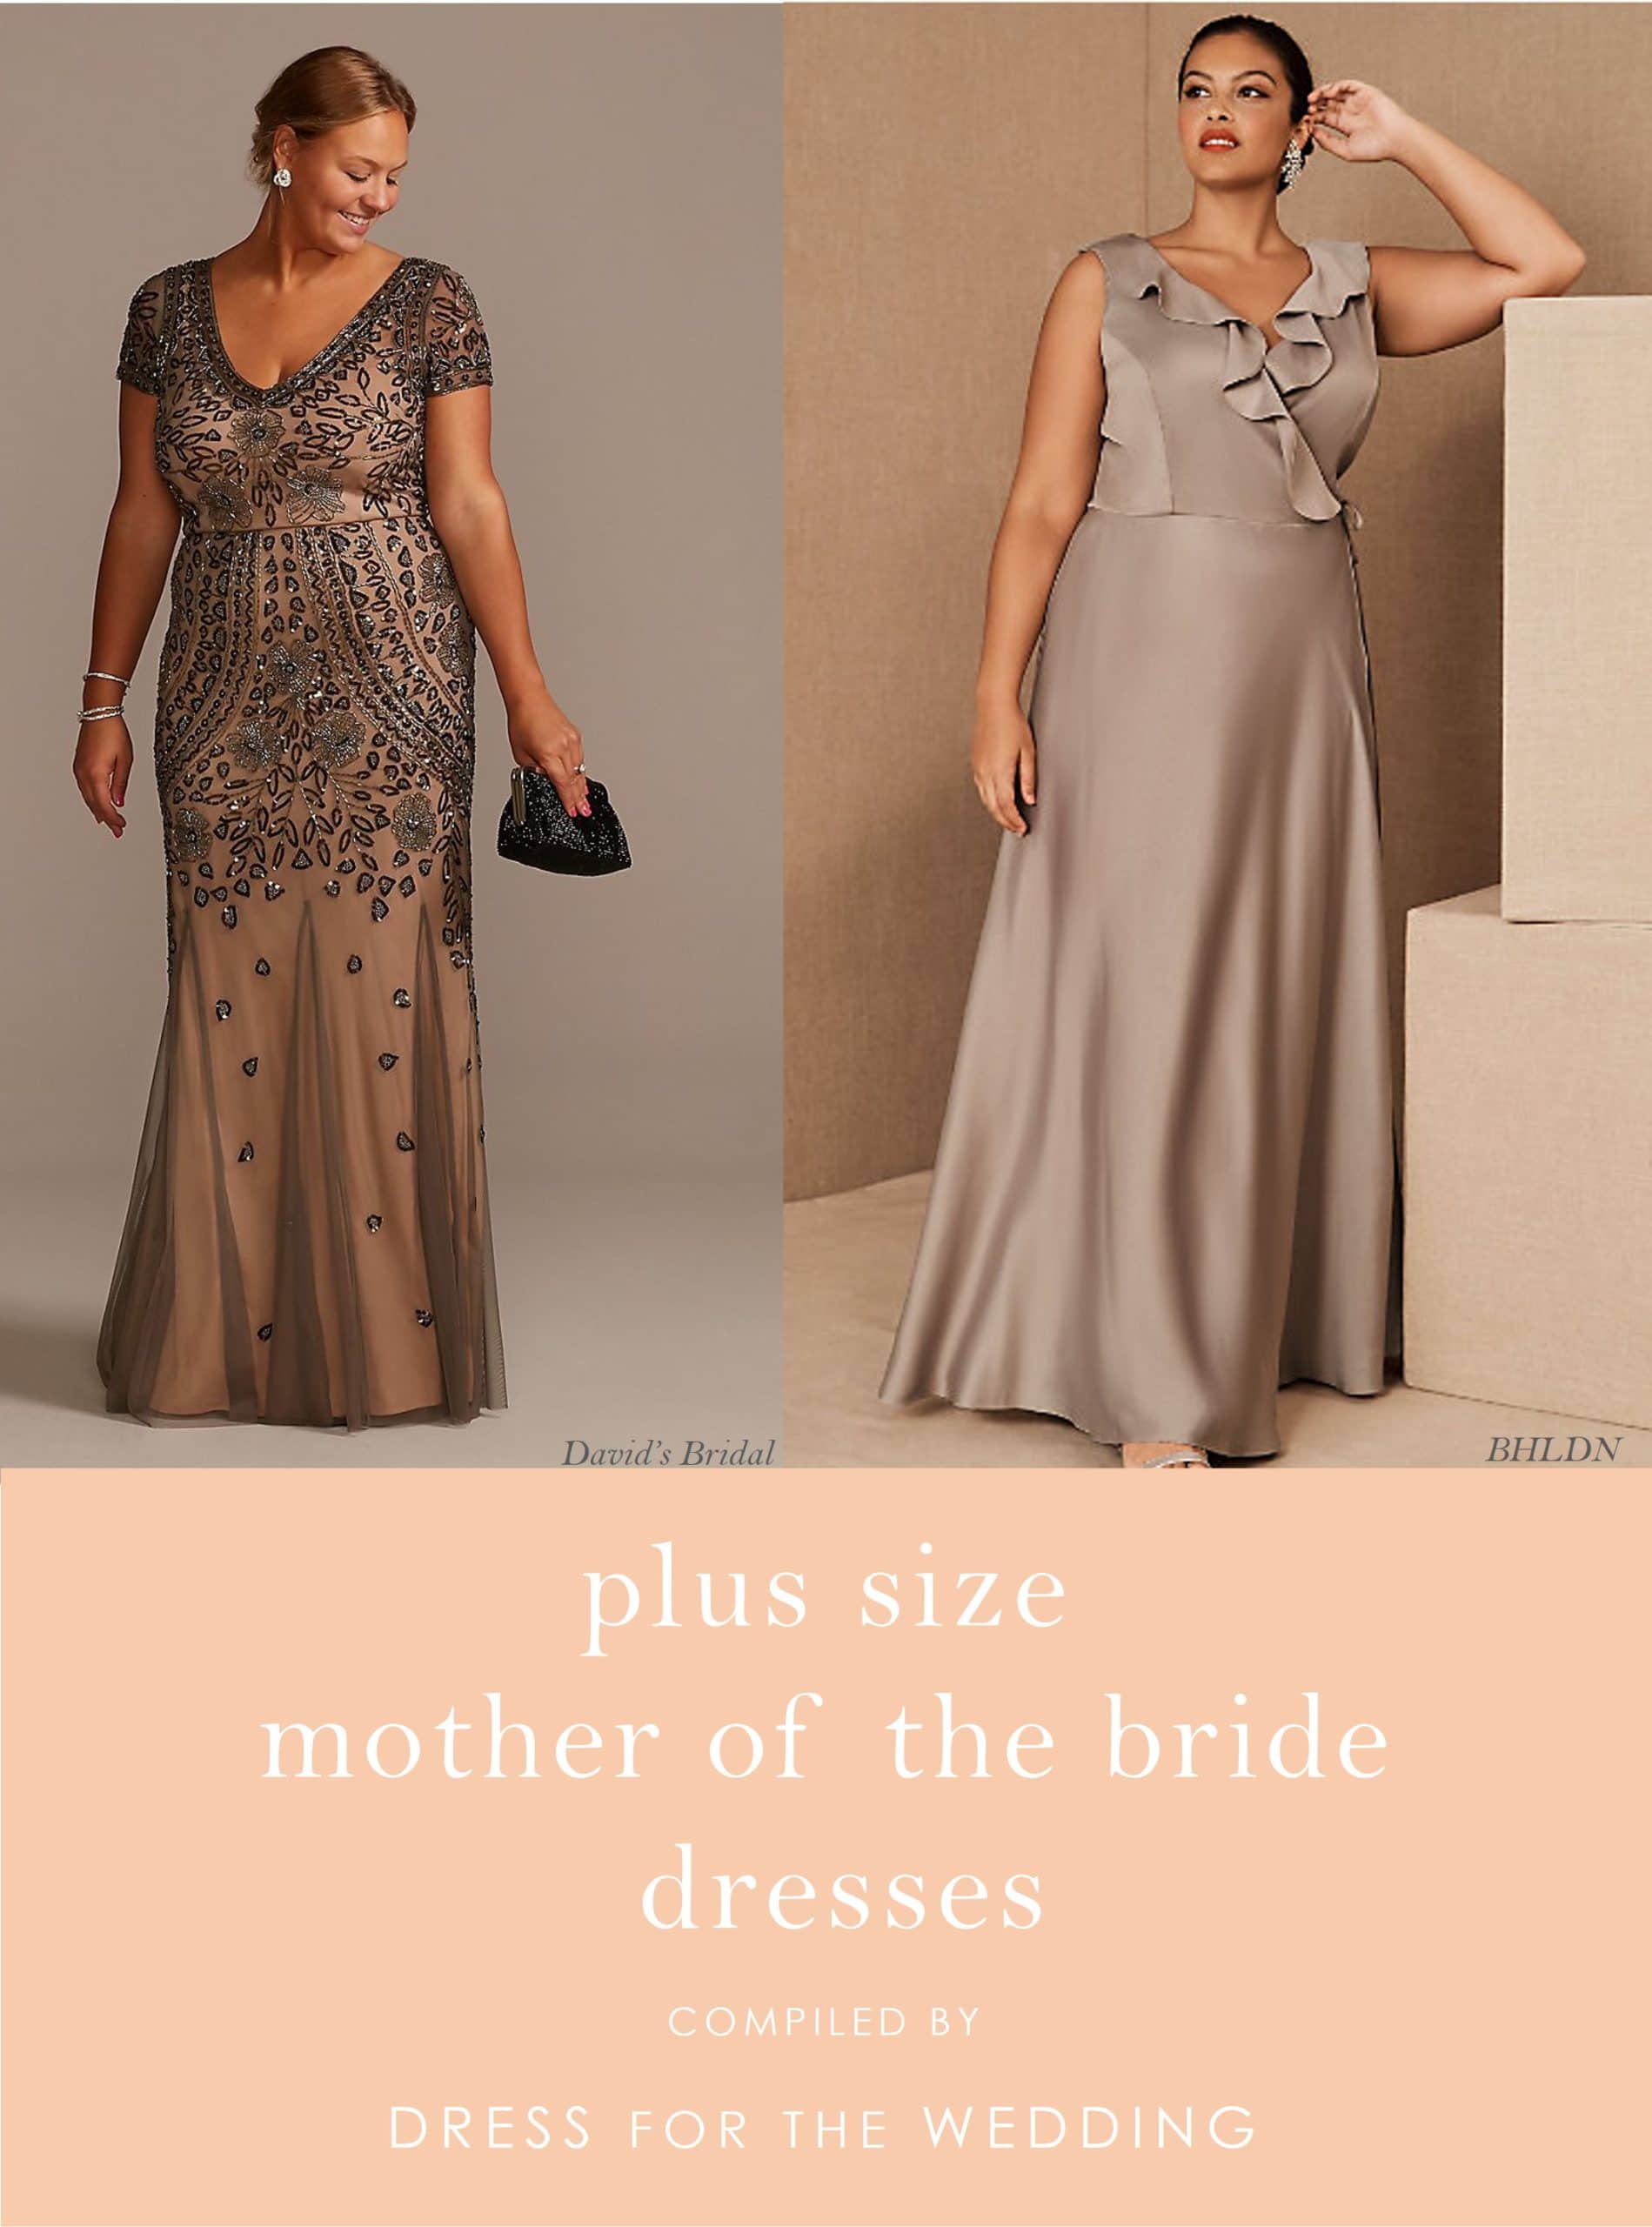 17 of the Best Mother of the Bride Pant Suits  Mother of the bride gown,  Mother of bride outfits, Pantsuits for women